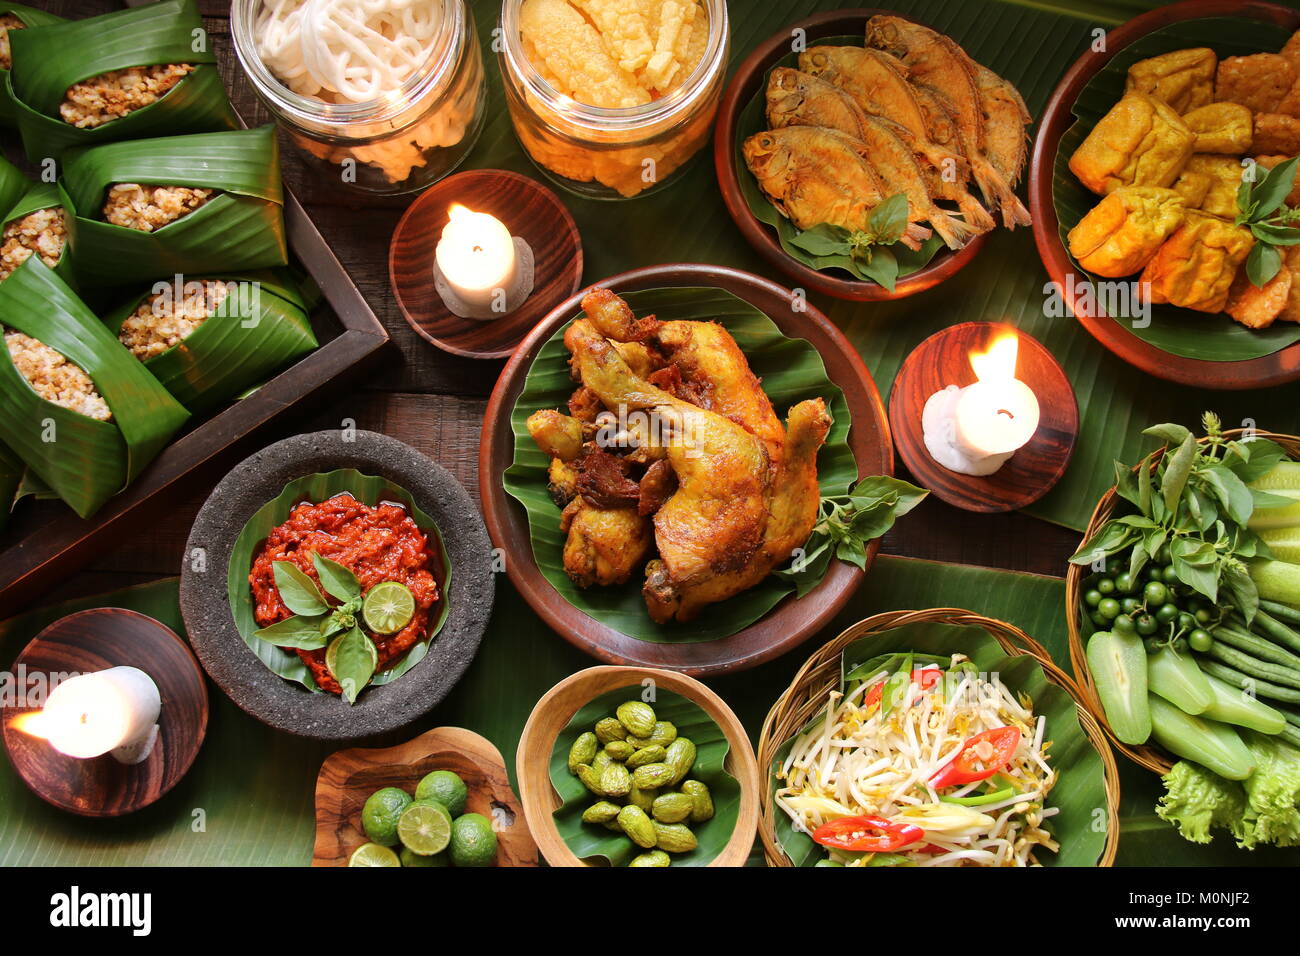 Nasi Tutug Oncom, the Sundanese Dish of Rice with Fermented Soybeans; Served with Variety of Side Dishes Stock Photo